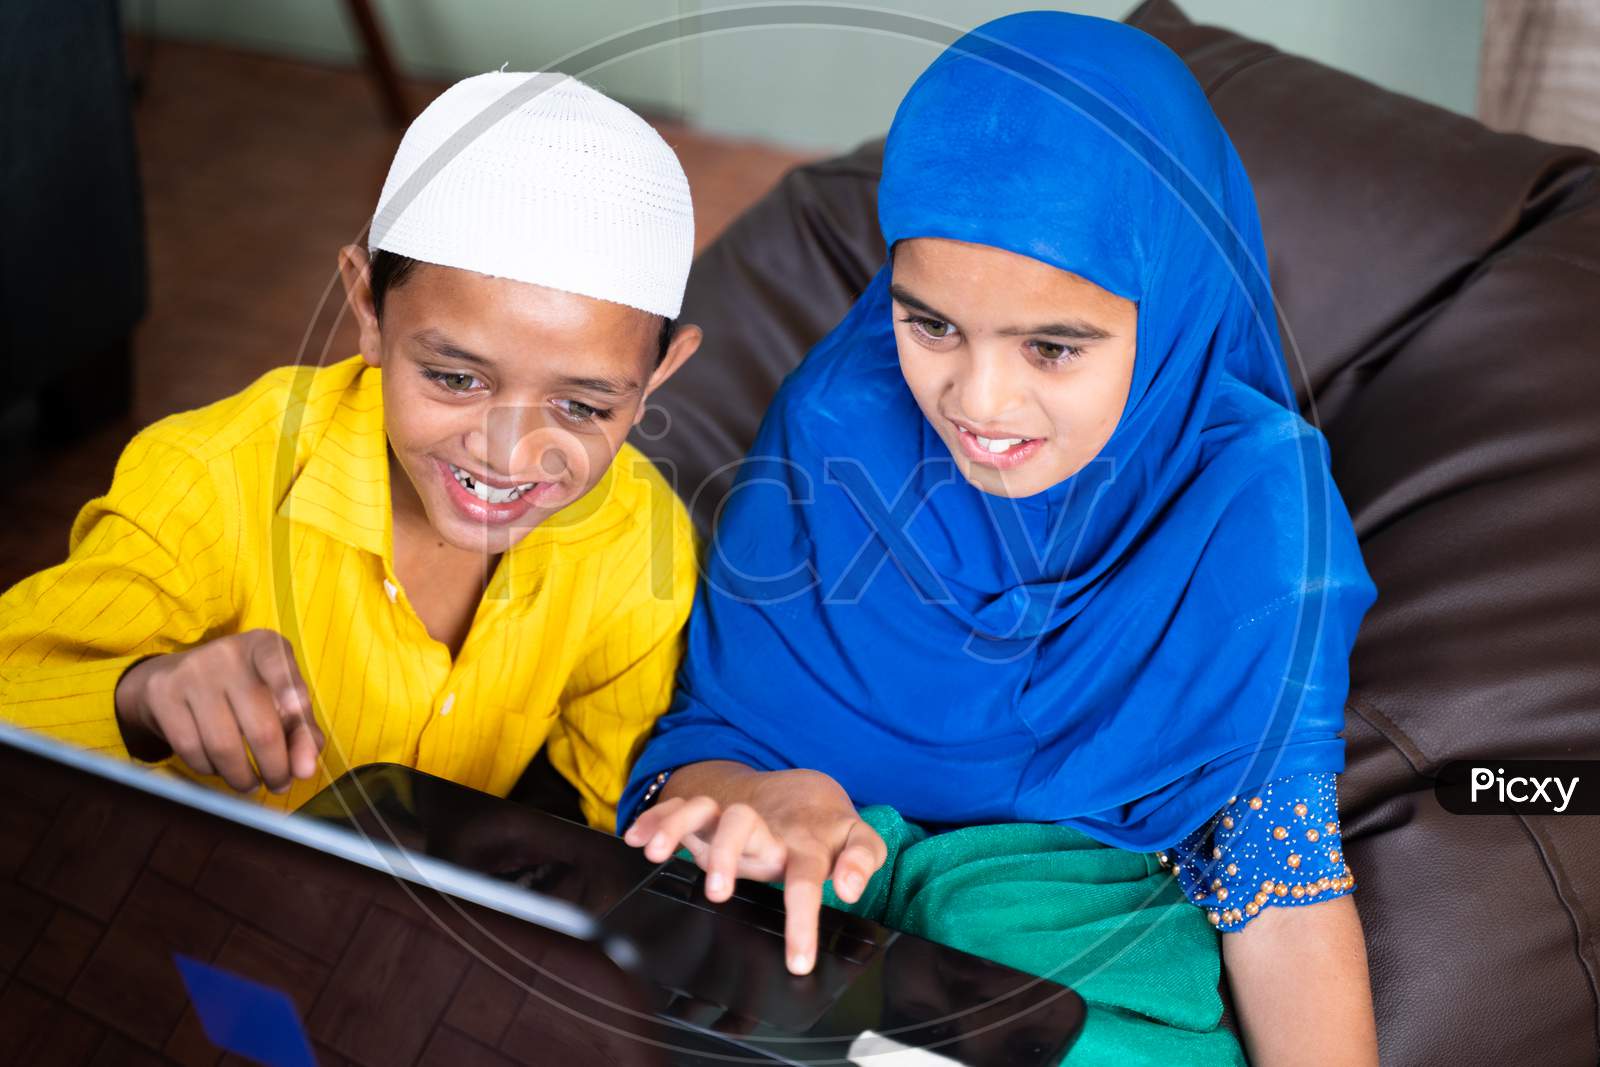 Two Muslim Teenager Kids Excited Over Using Laptop At Home - Concept Of Kids Using Modern Technology And Internet.